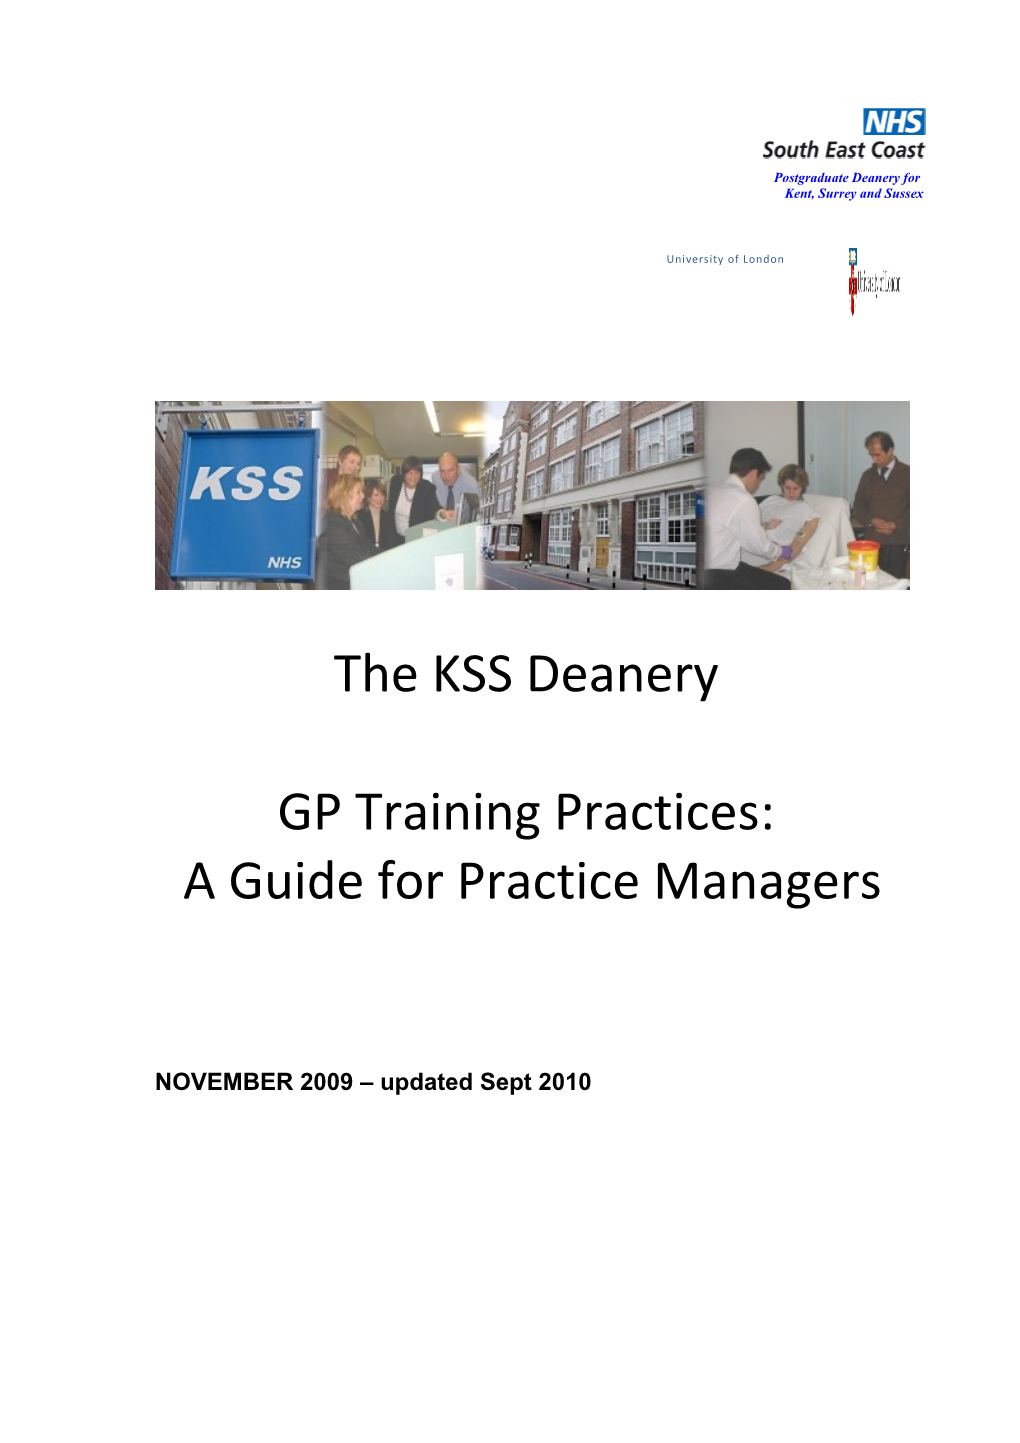 GP Training Practices: a Guide for Practice Managers s1